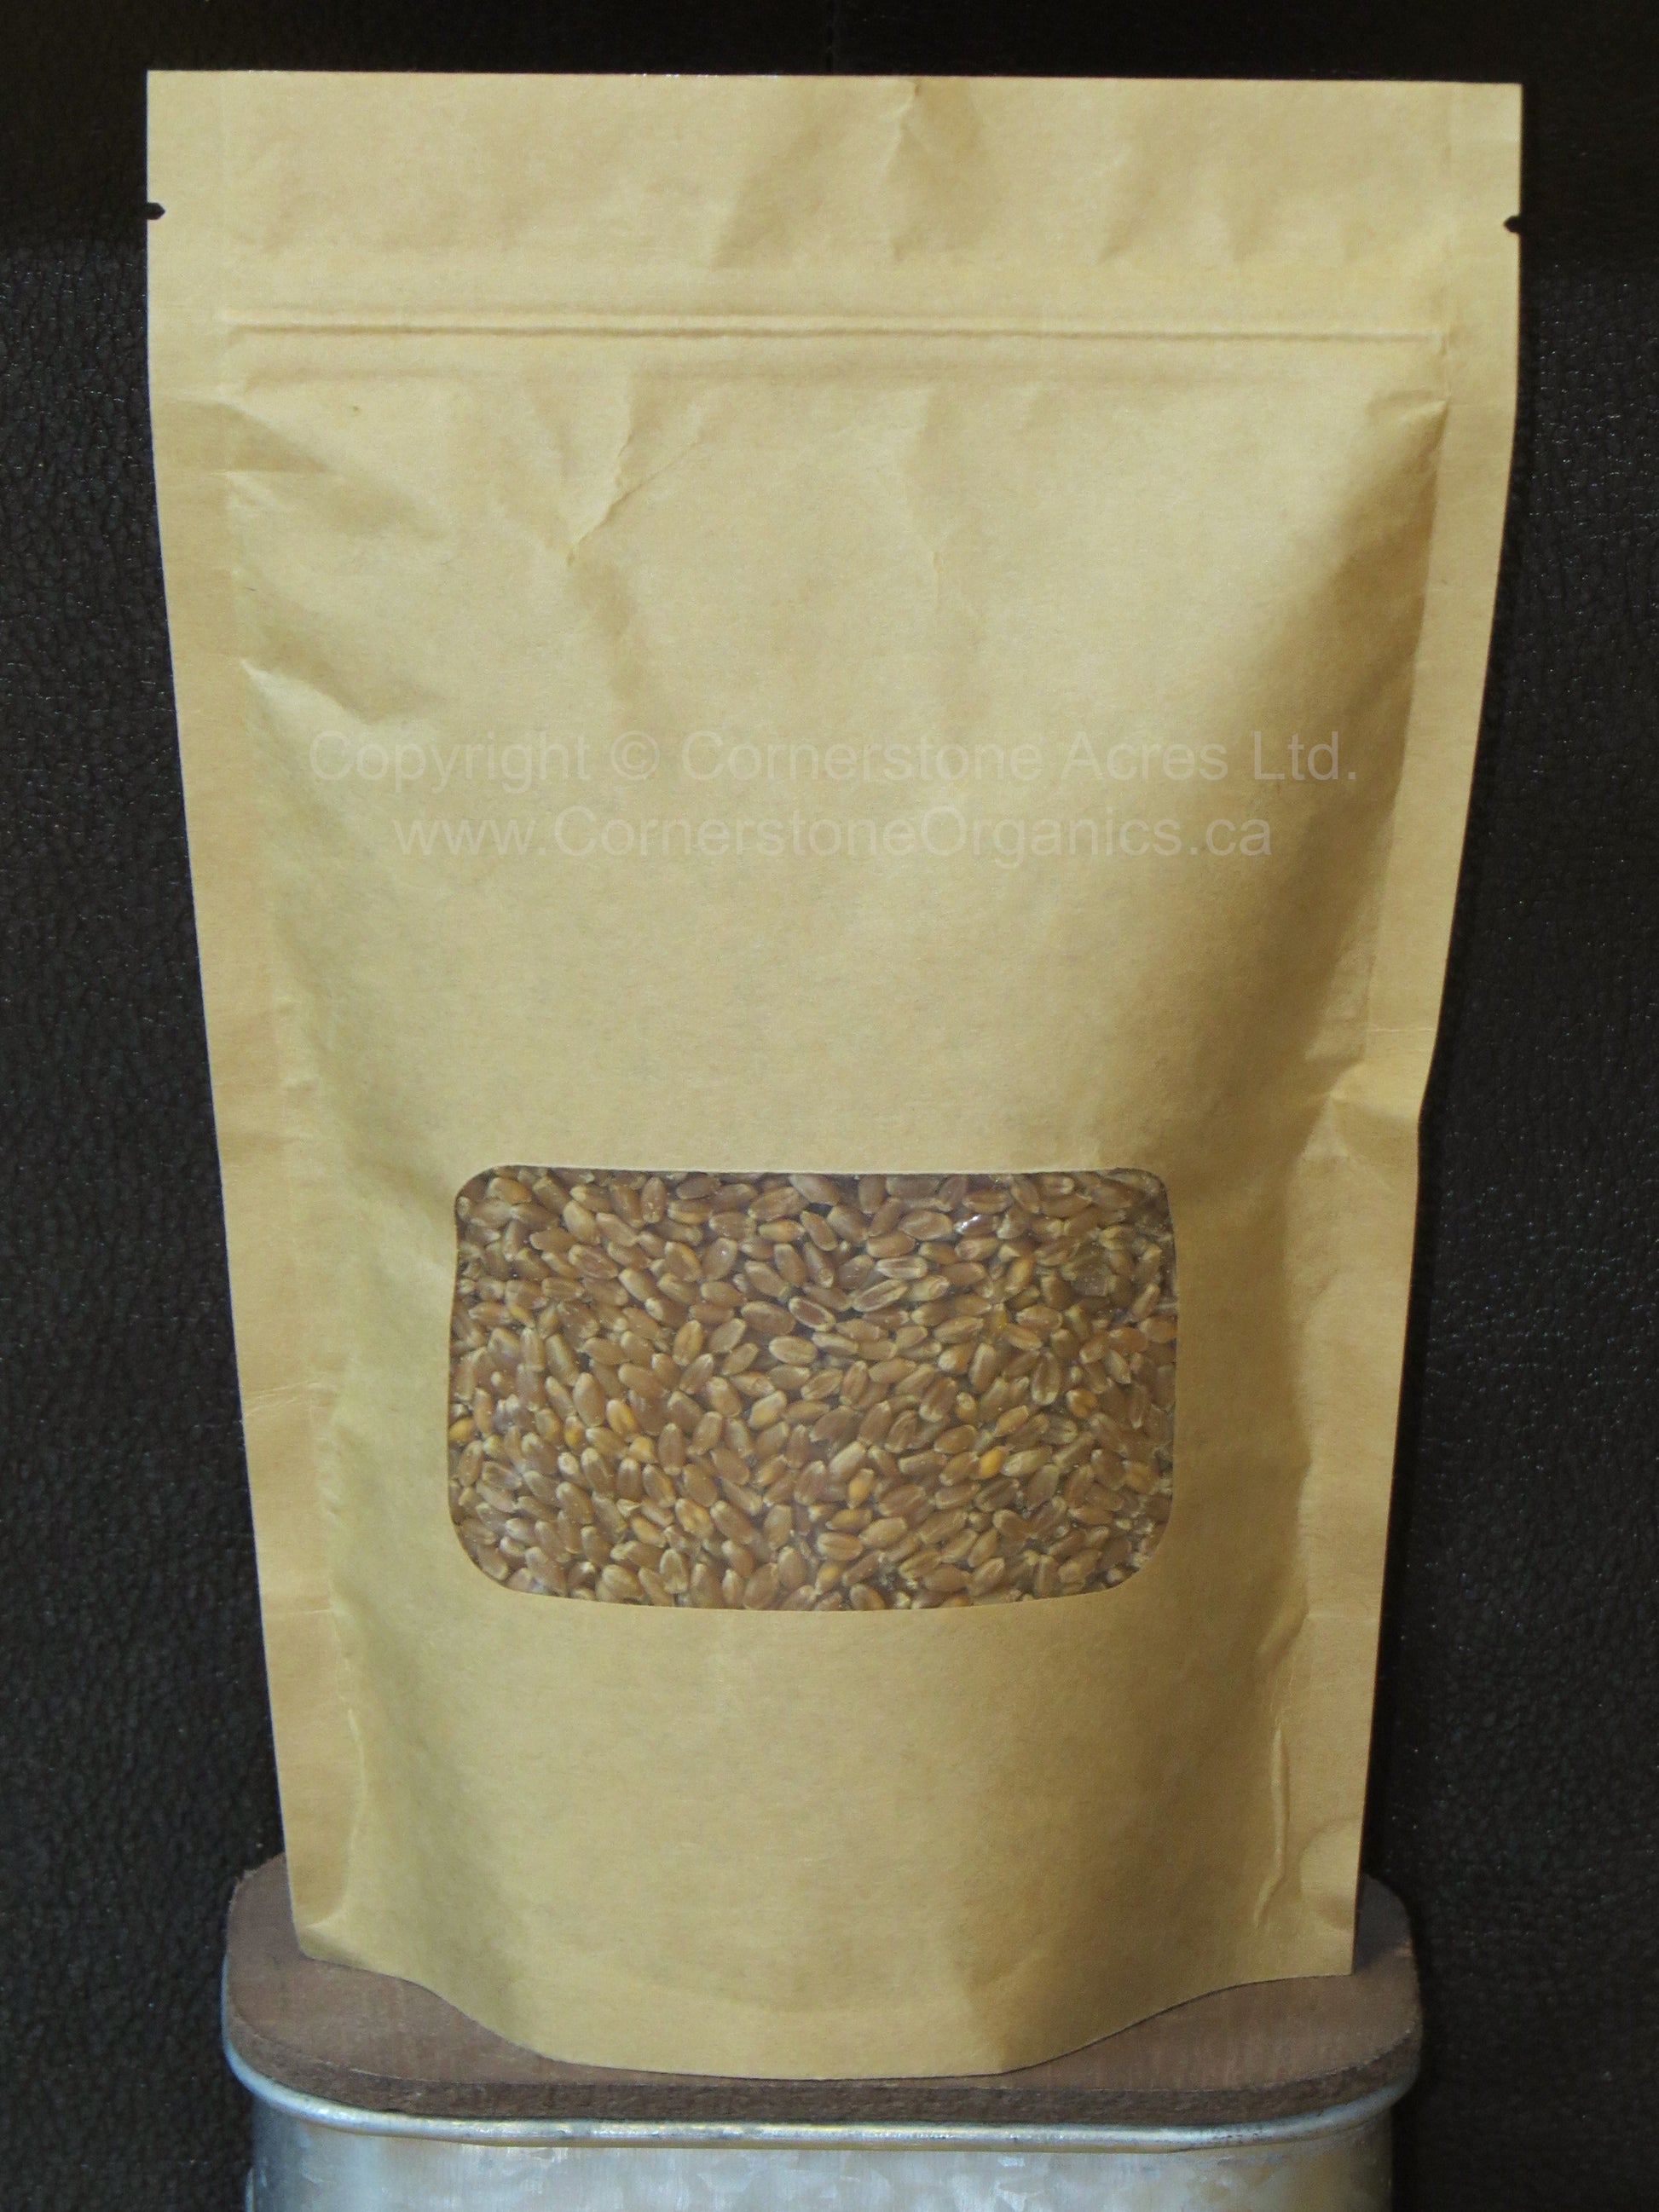 Bag of Hard Red Spring Wheat